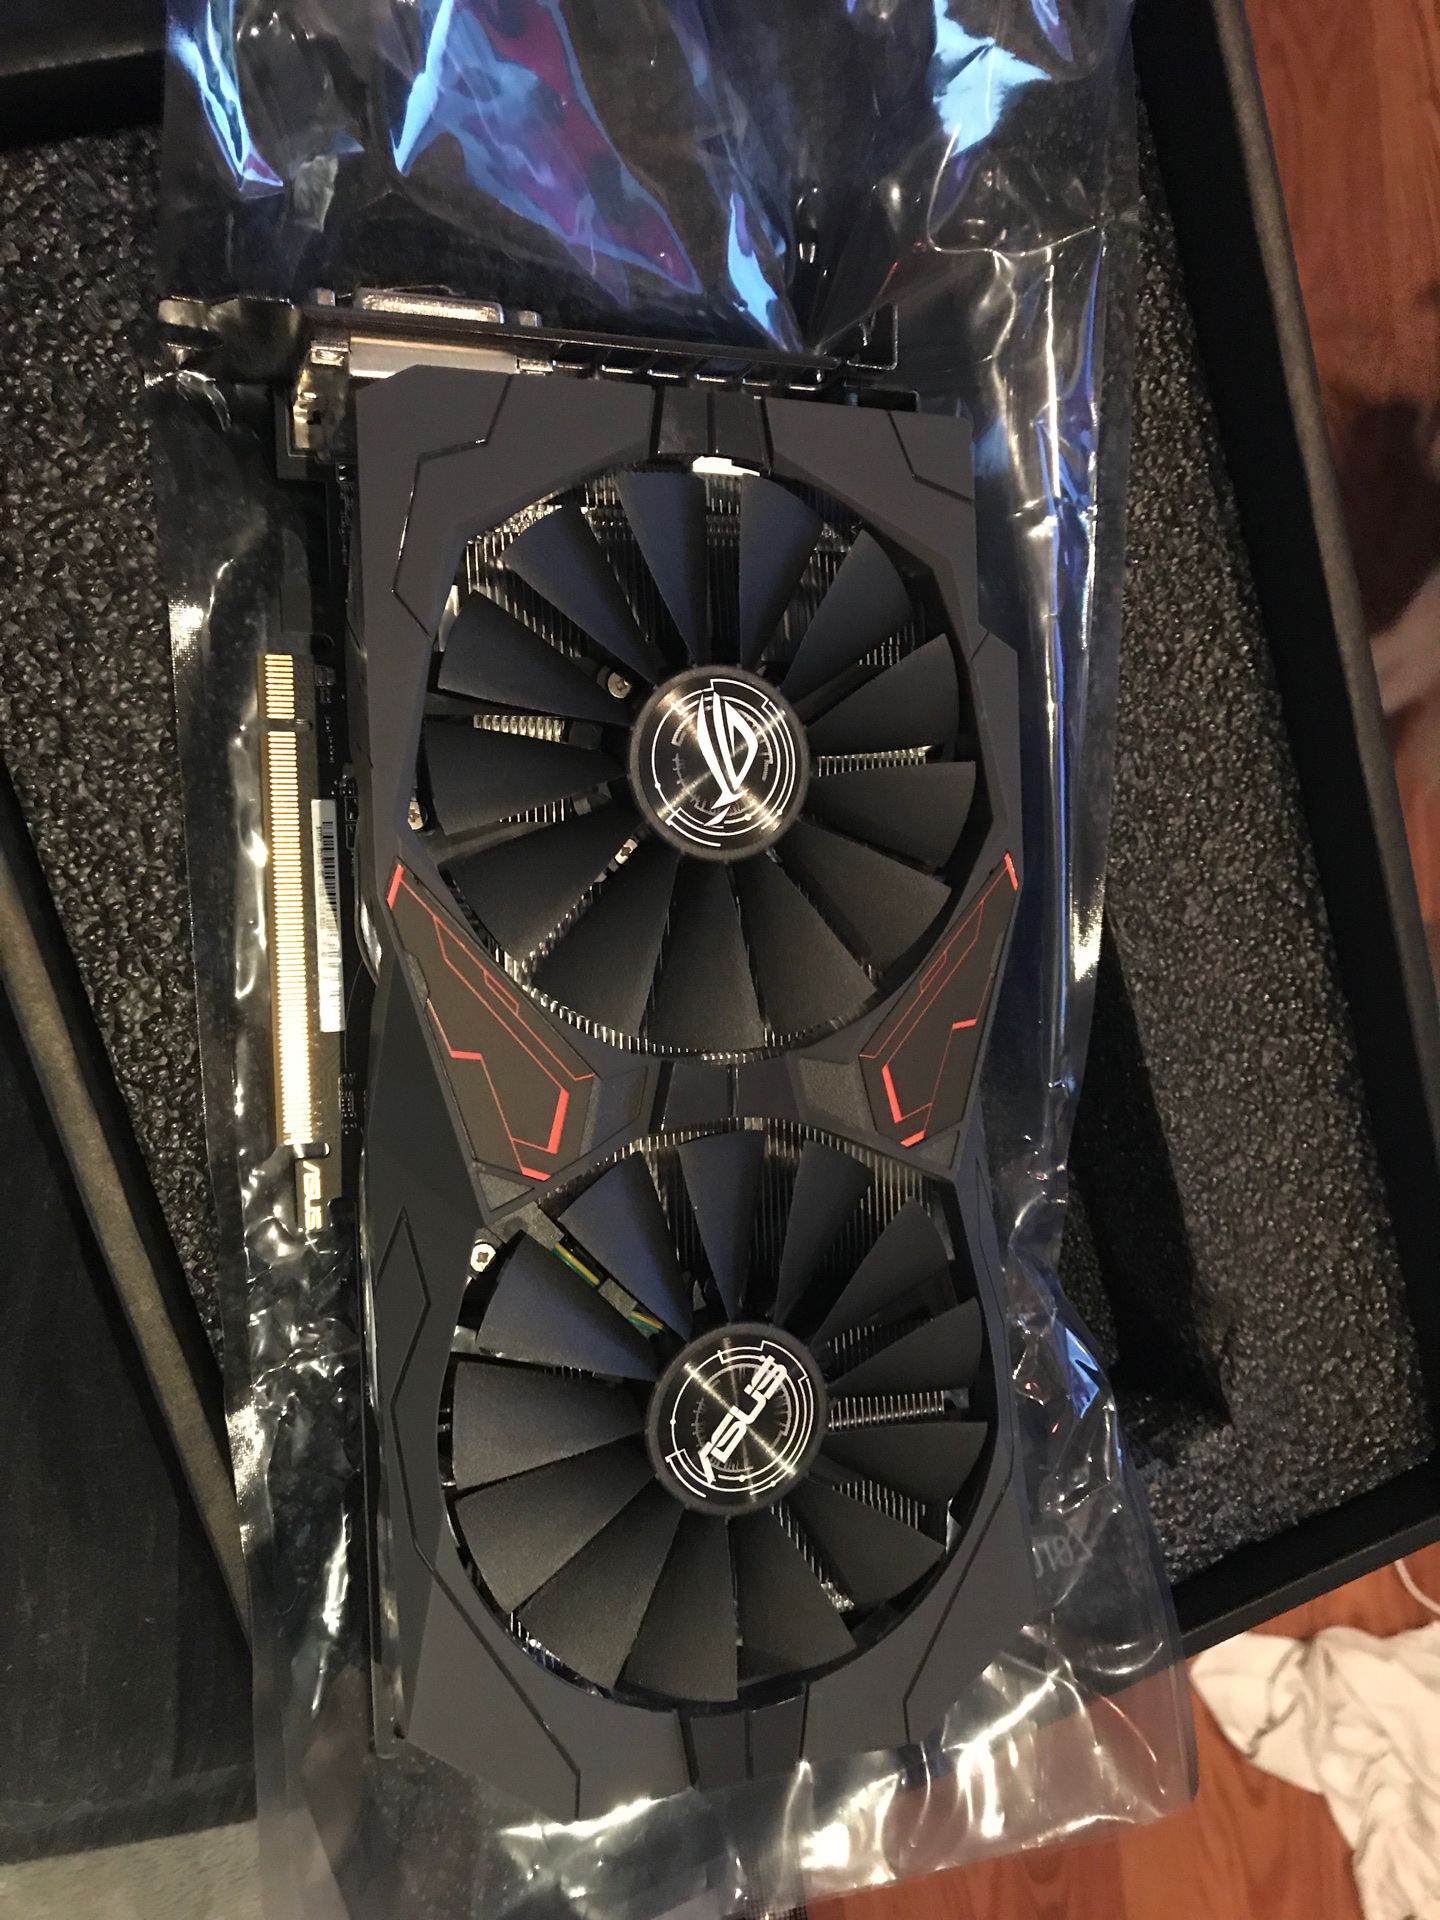 Asus rx470 graphics card